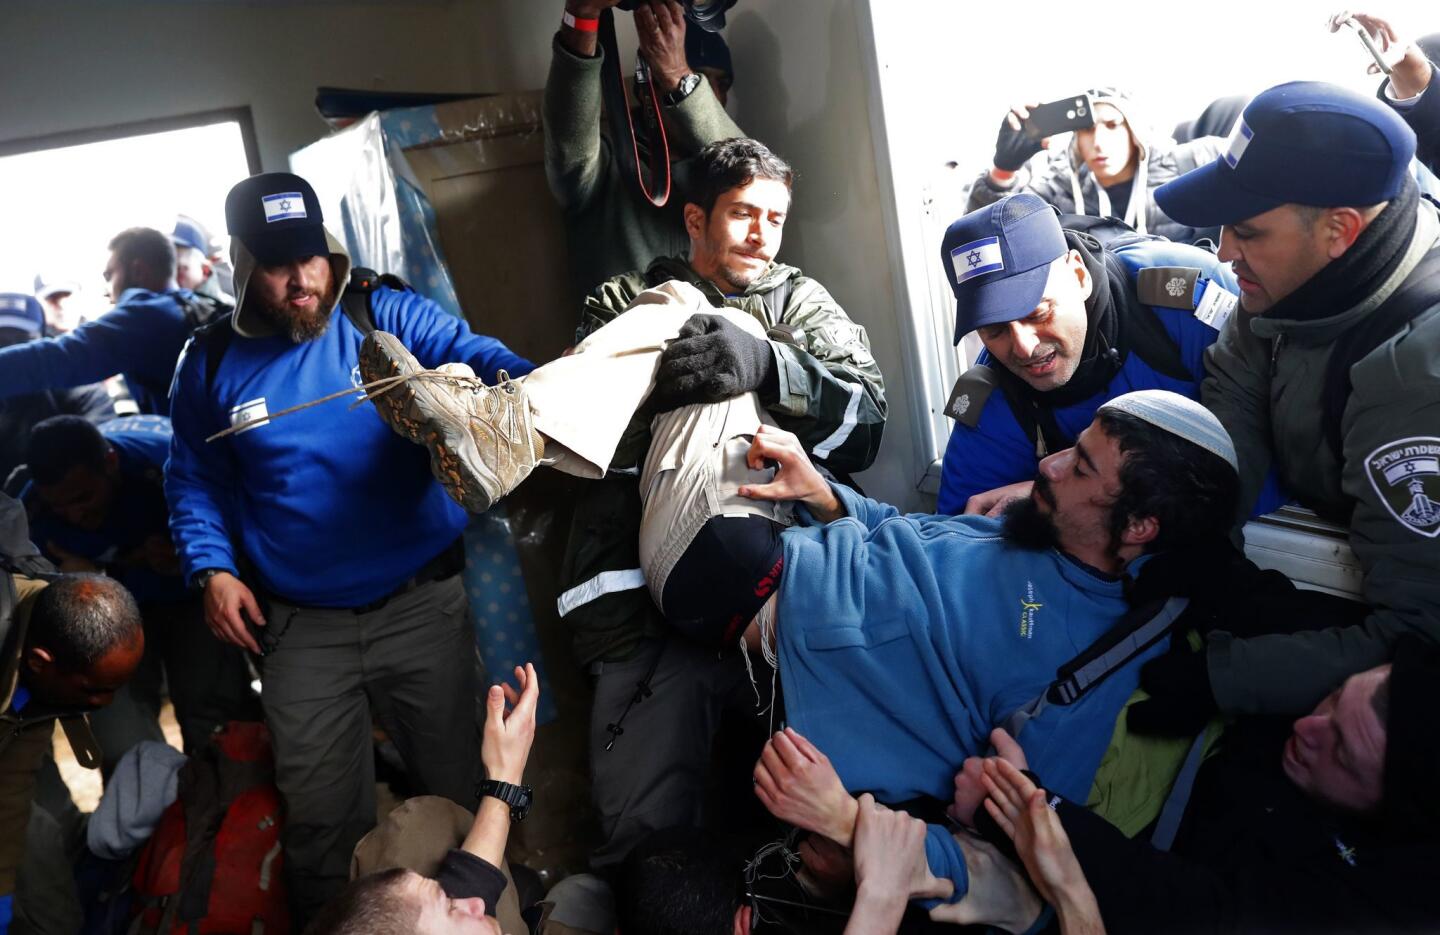 Residents of the West Bank village of Amona, which was built on private Palestinian land, are physically removed by Israeli security forces during eviction proceedings.